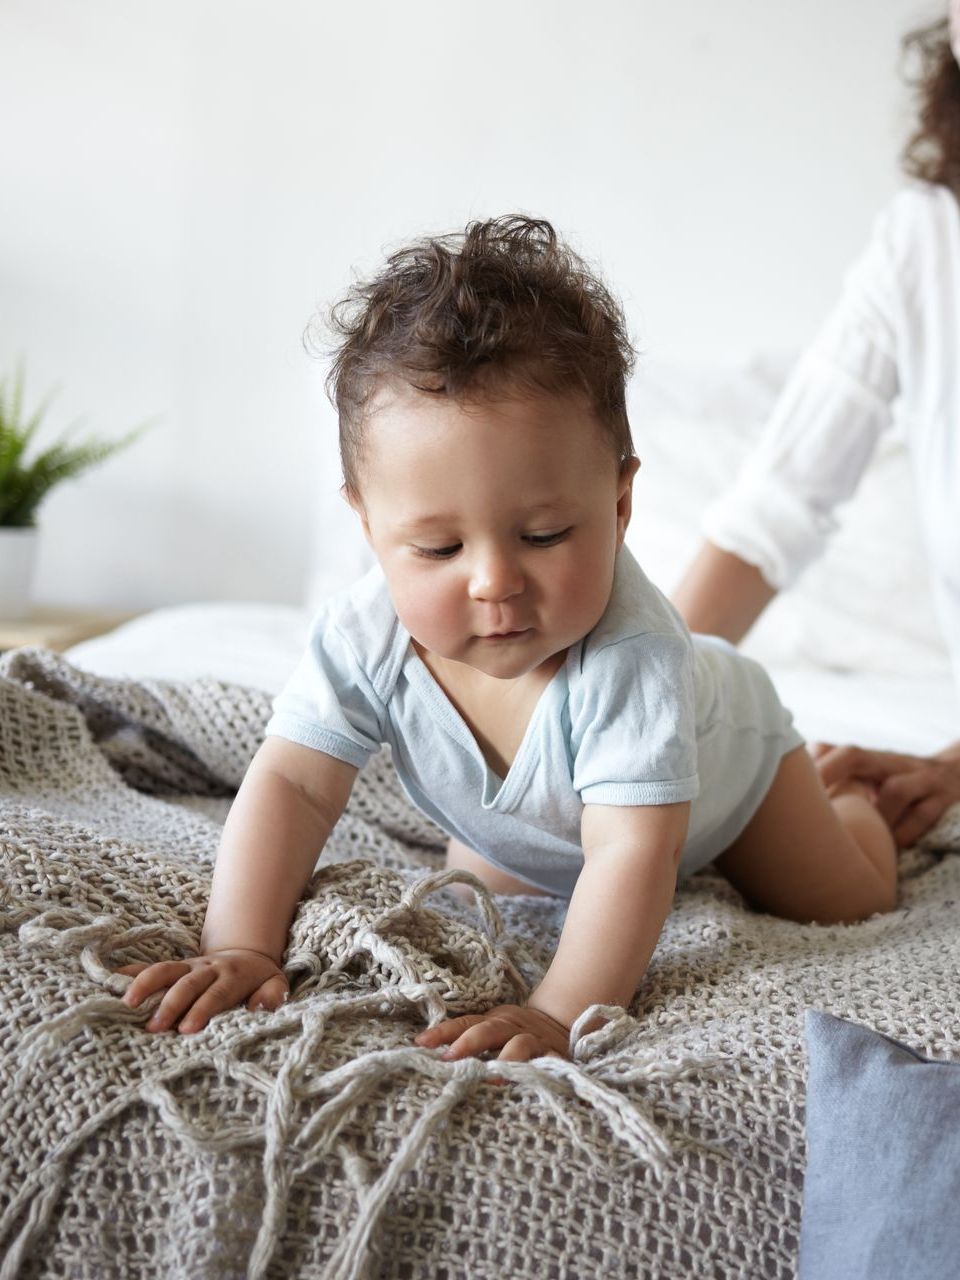 a baby is crawling on a bed next to a woman